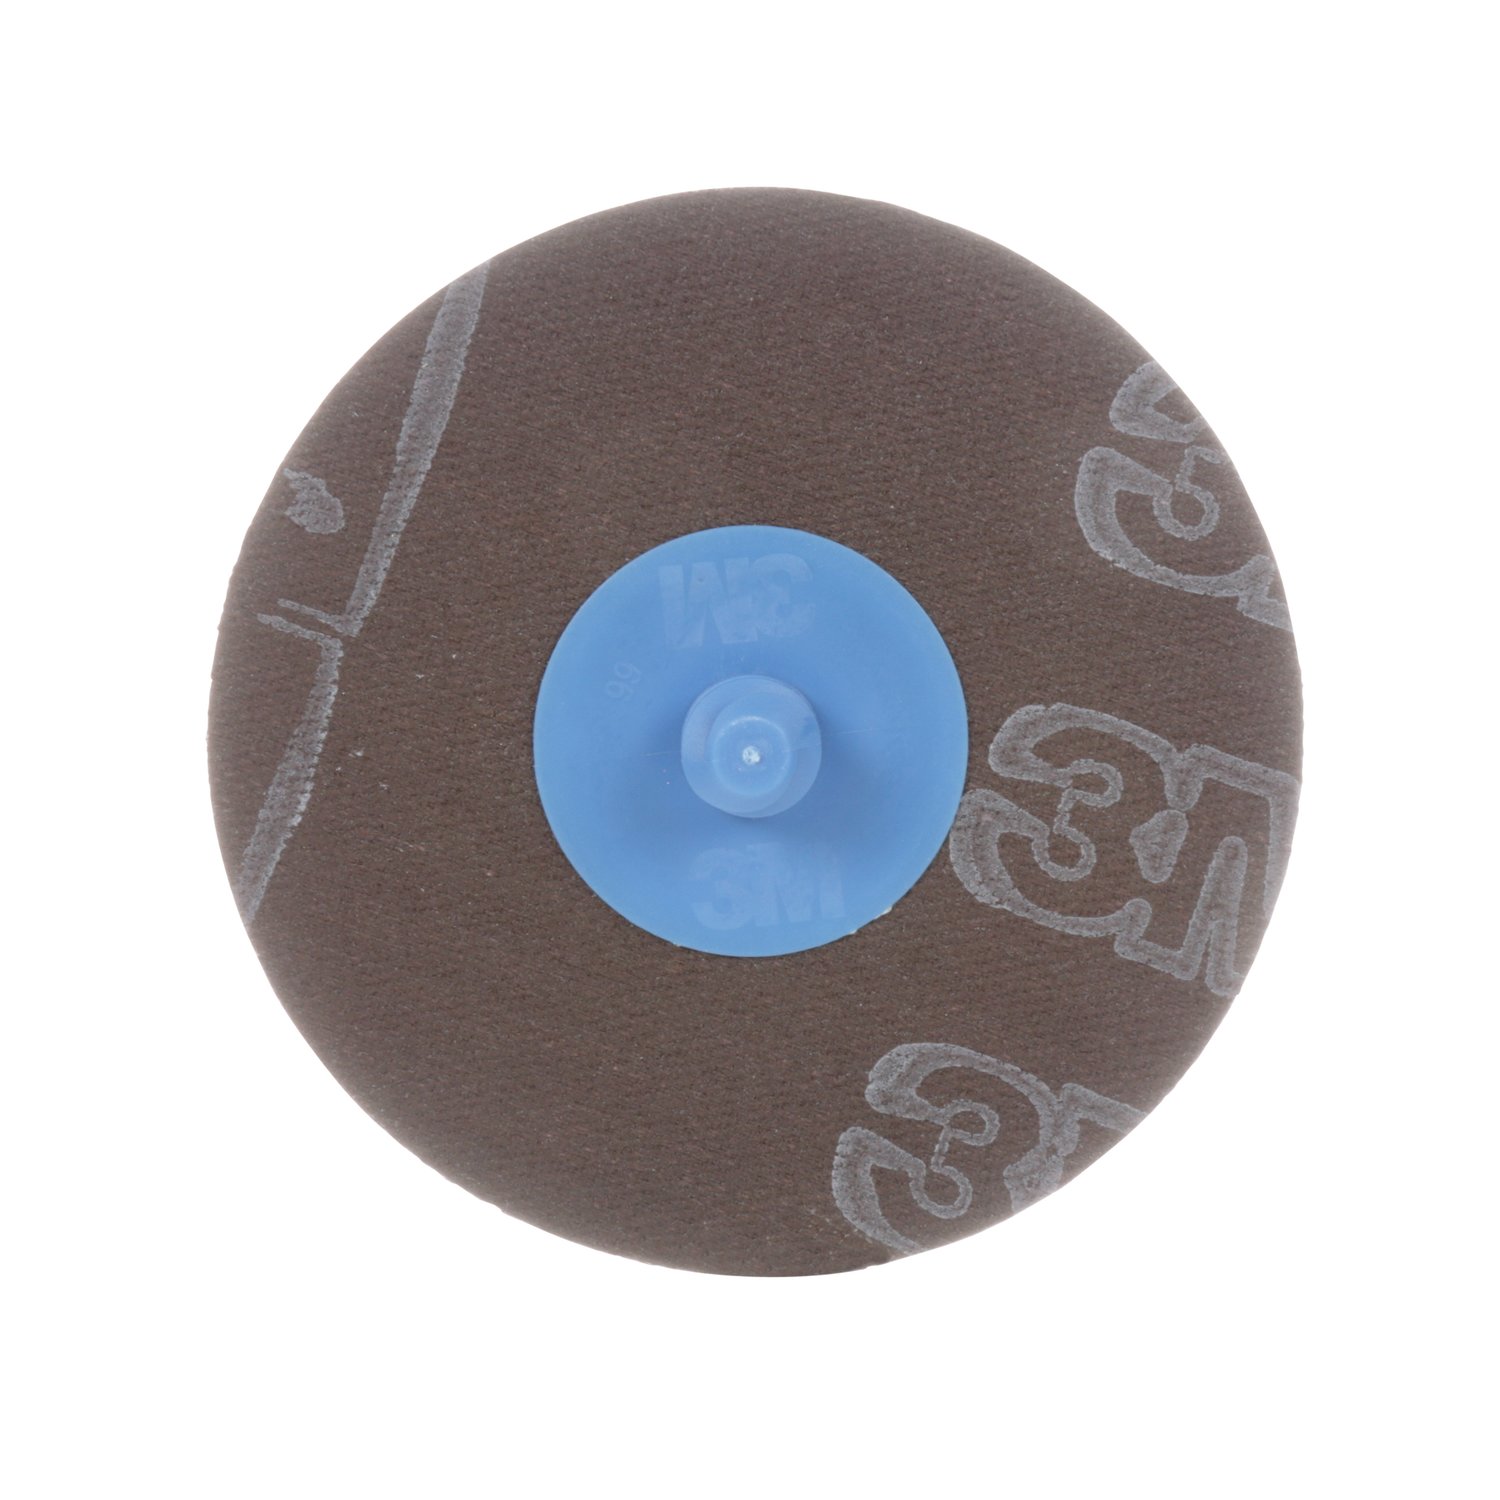 7010534955 - 3M Trizact Roloc Cloth Disc 237AA, A100 X-weight, TR, 1-1/2 in, Die
R150S